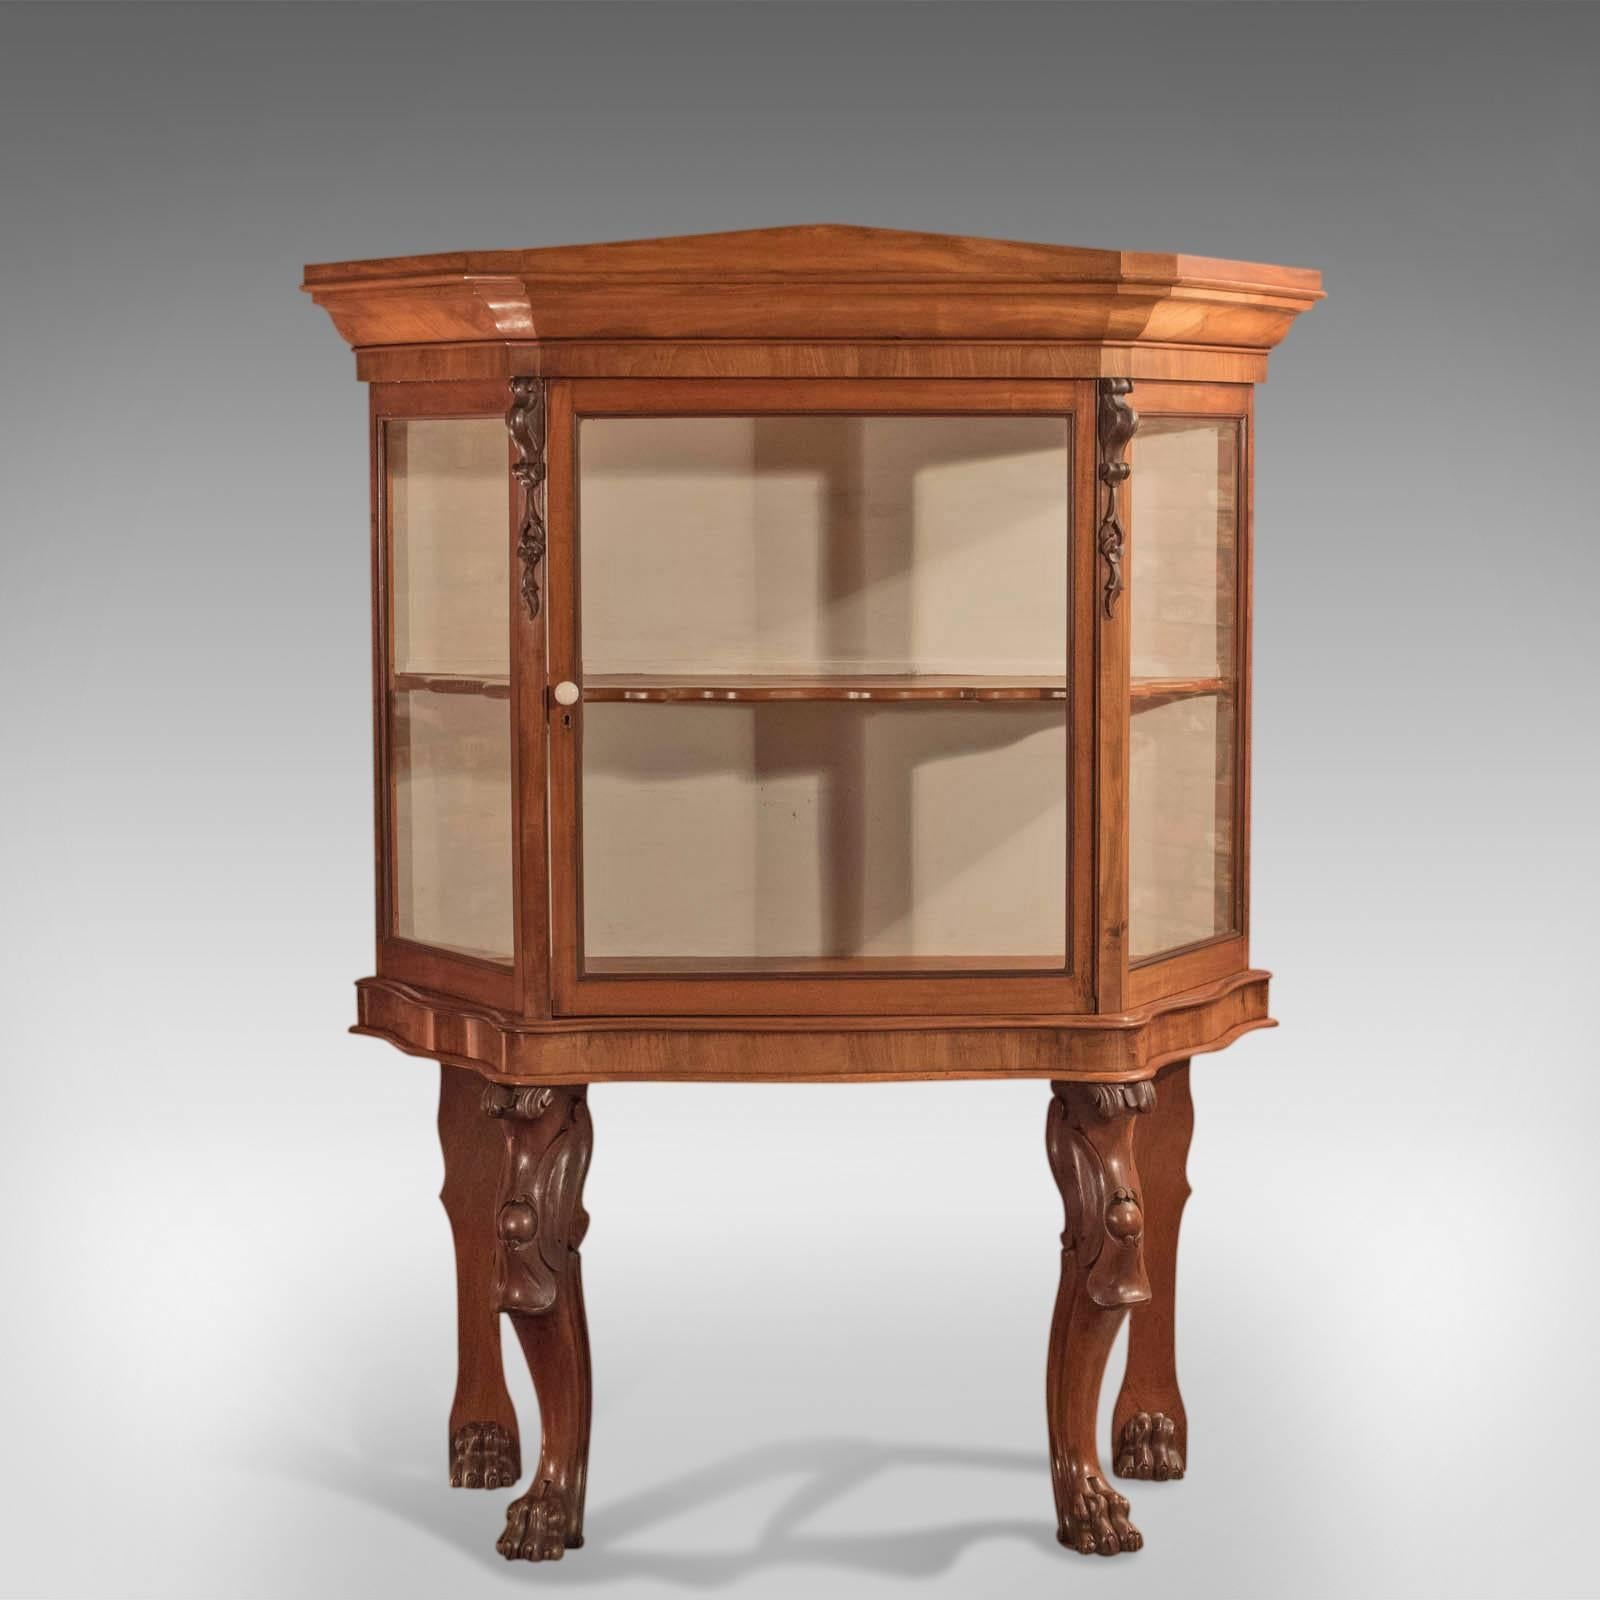 This is an antique, Regency display cabinet in mahogany circa 1820.

Rare, bespoke and of fine quality, this cabinet is raised on the most fabulous cabriole legs to the front; The heavily carved knees display scroll and foliate detail and sweep